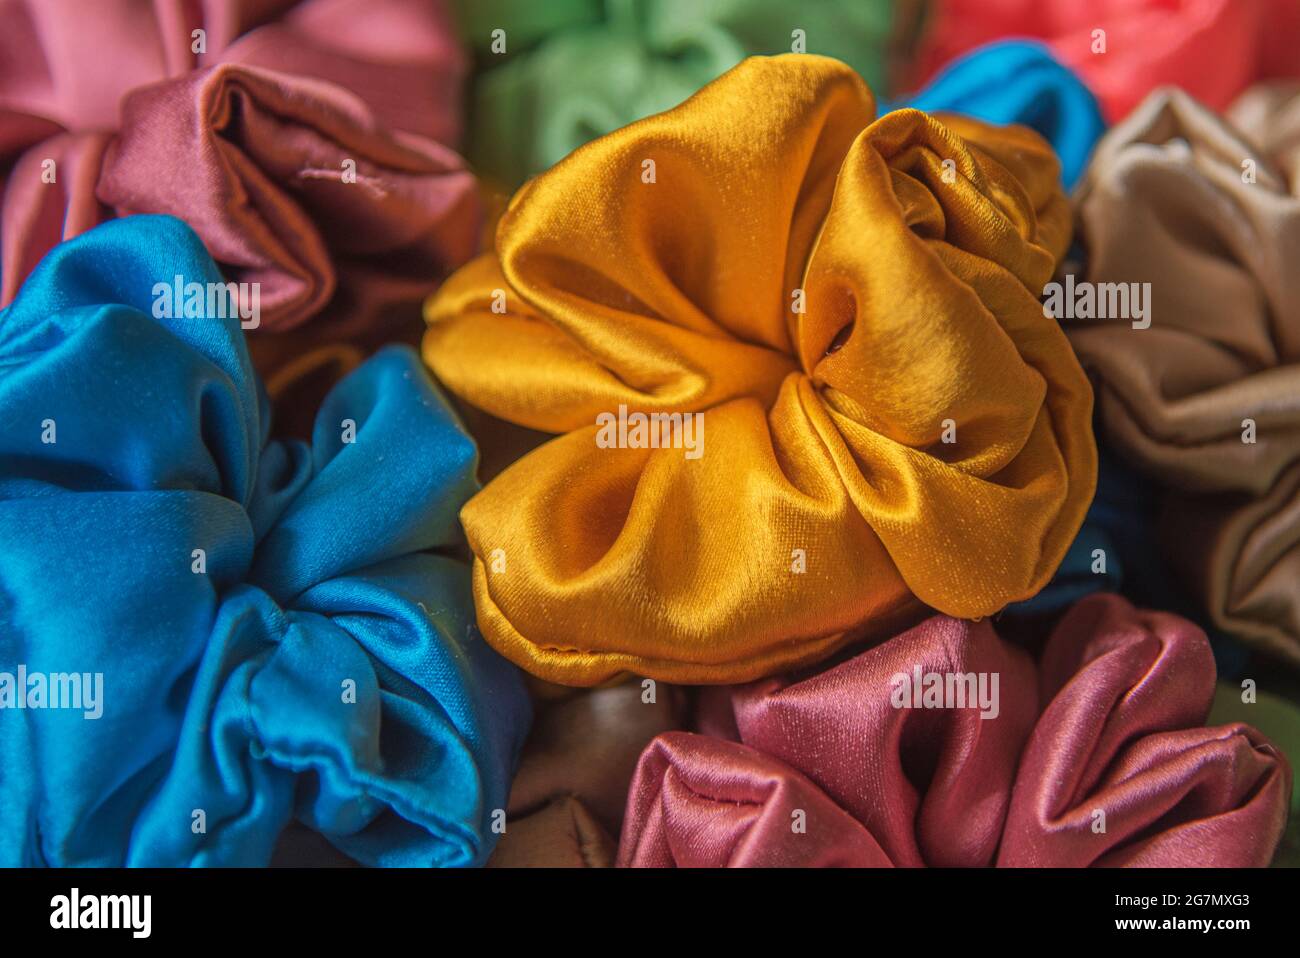 Colorful scrunchies, Hair accessories on the table Stock Photo